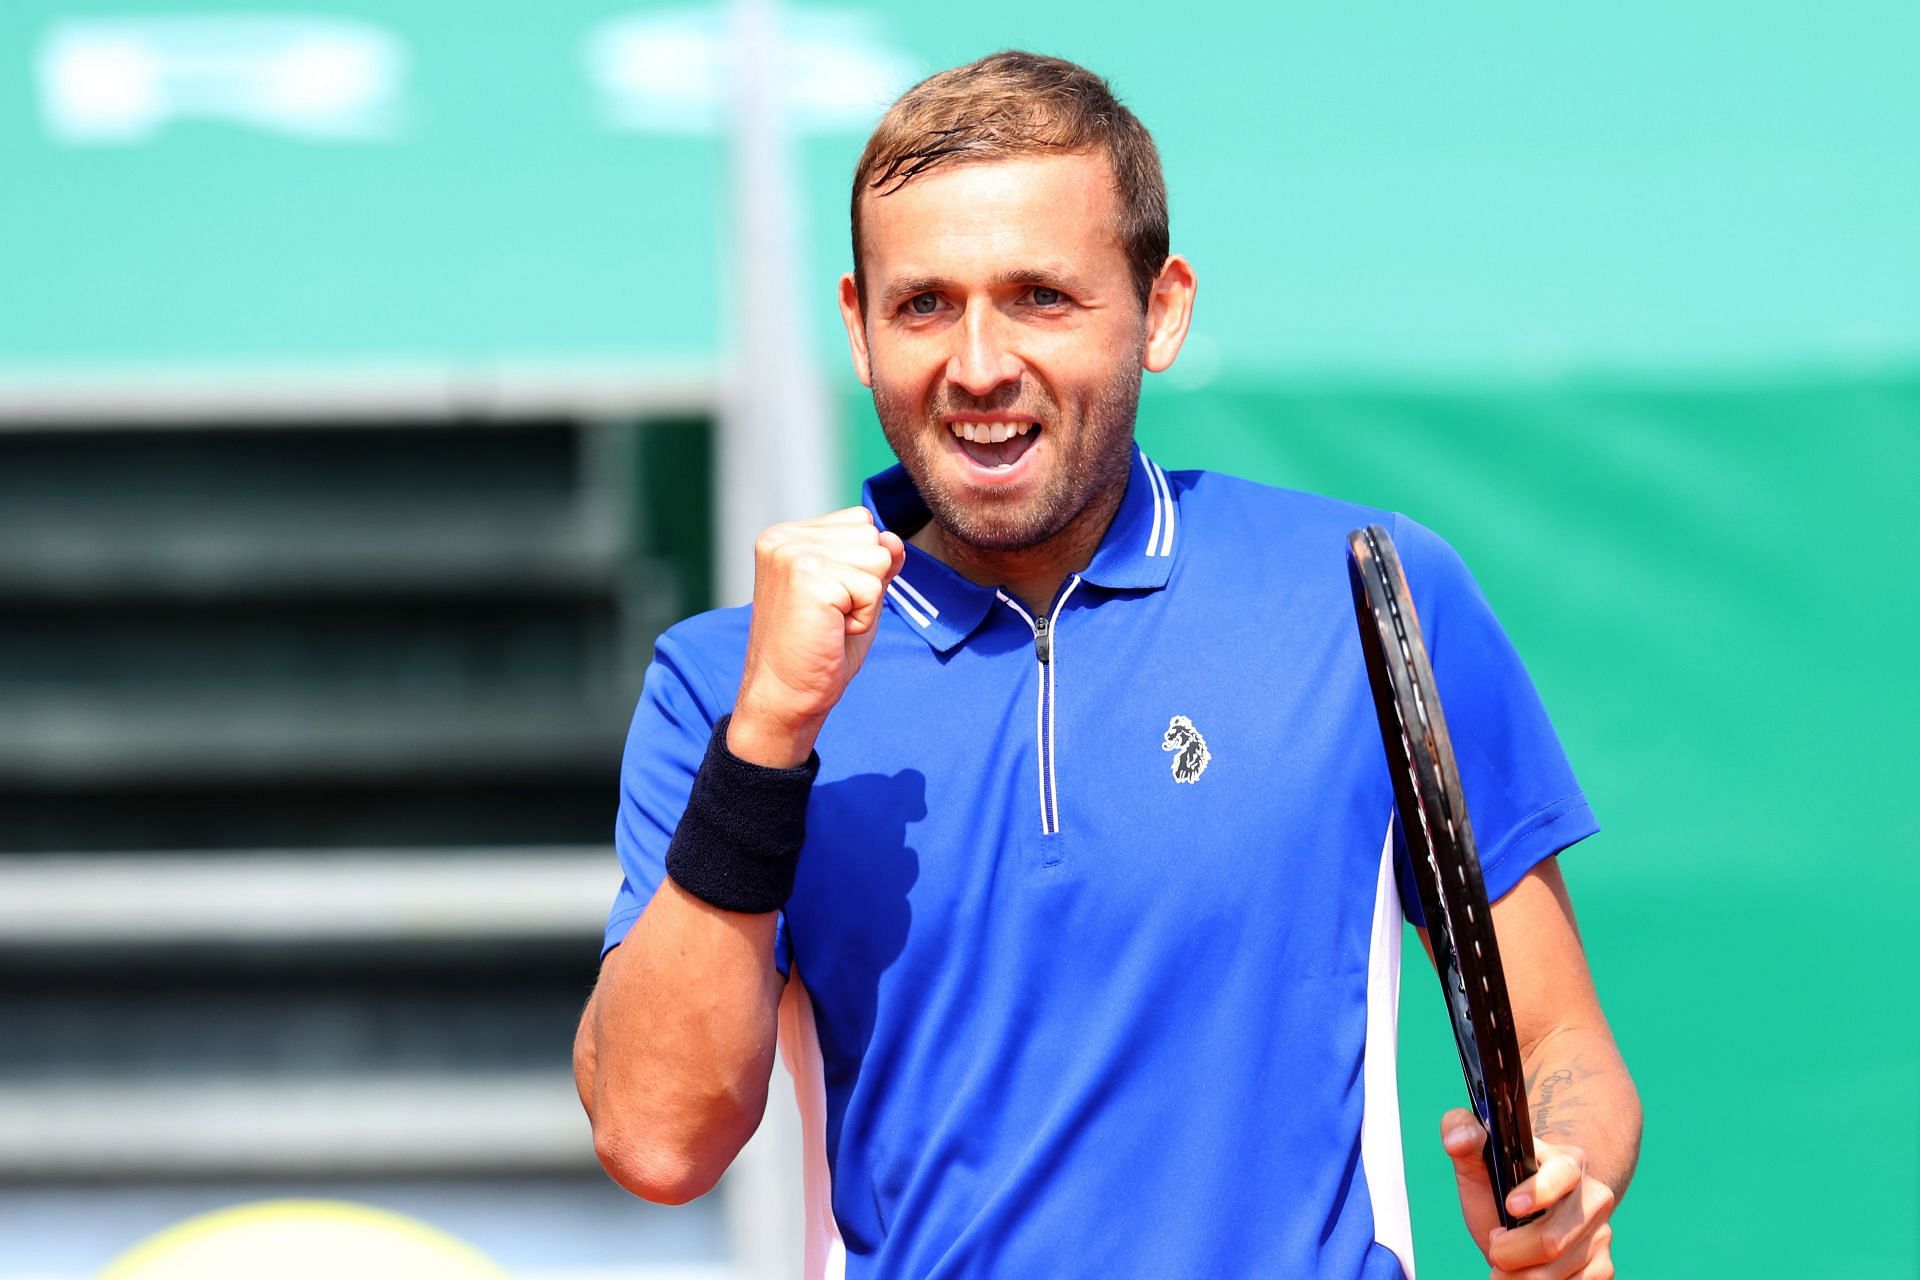 Dan Evans became the first player to beat Novak Djokovic in 2021